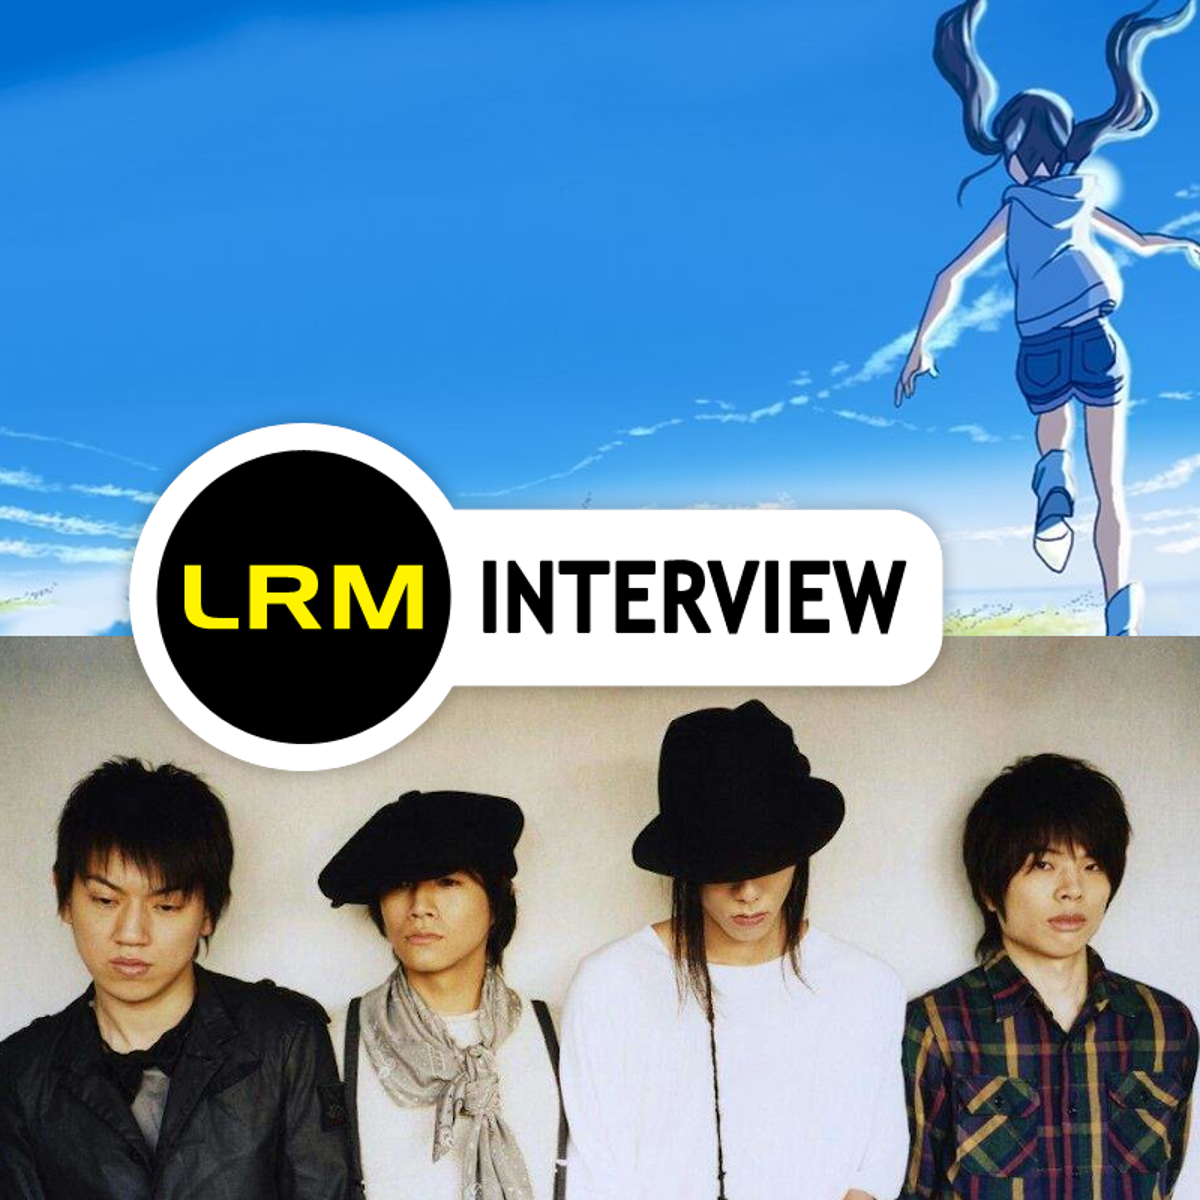 Weathering With You Award Winning Radwimps On Re Teaming With Anime Auteur Makoto Shinkai For Score Lrm